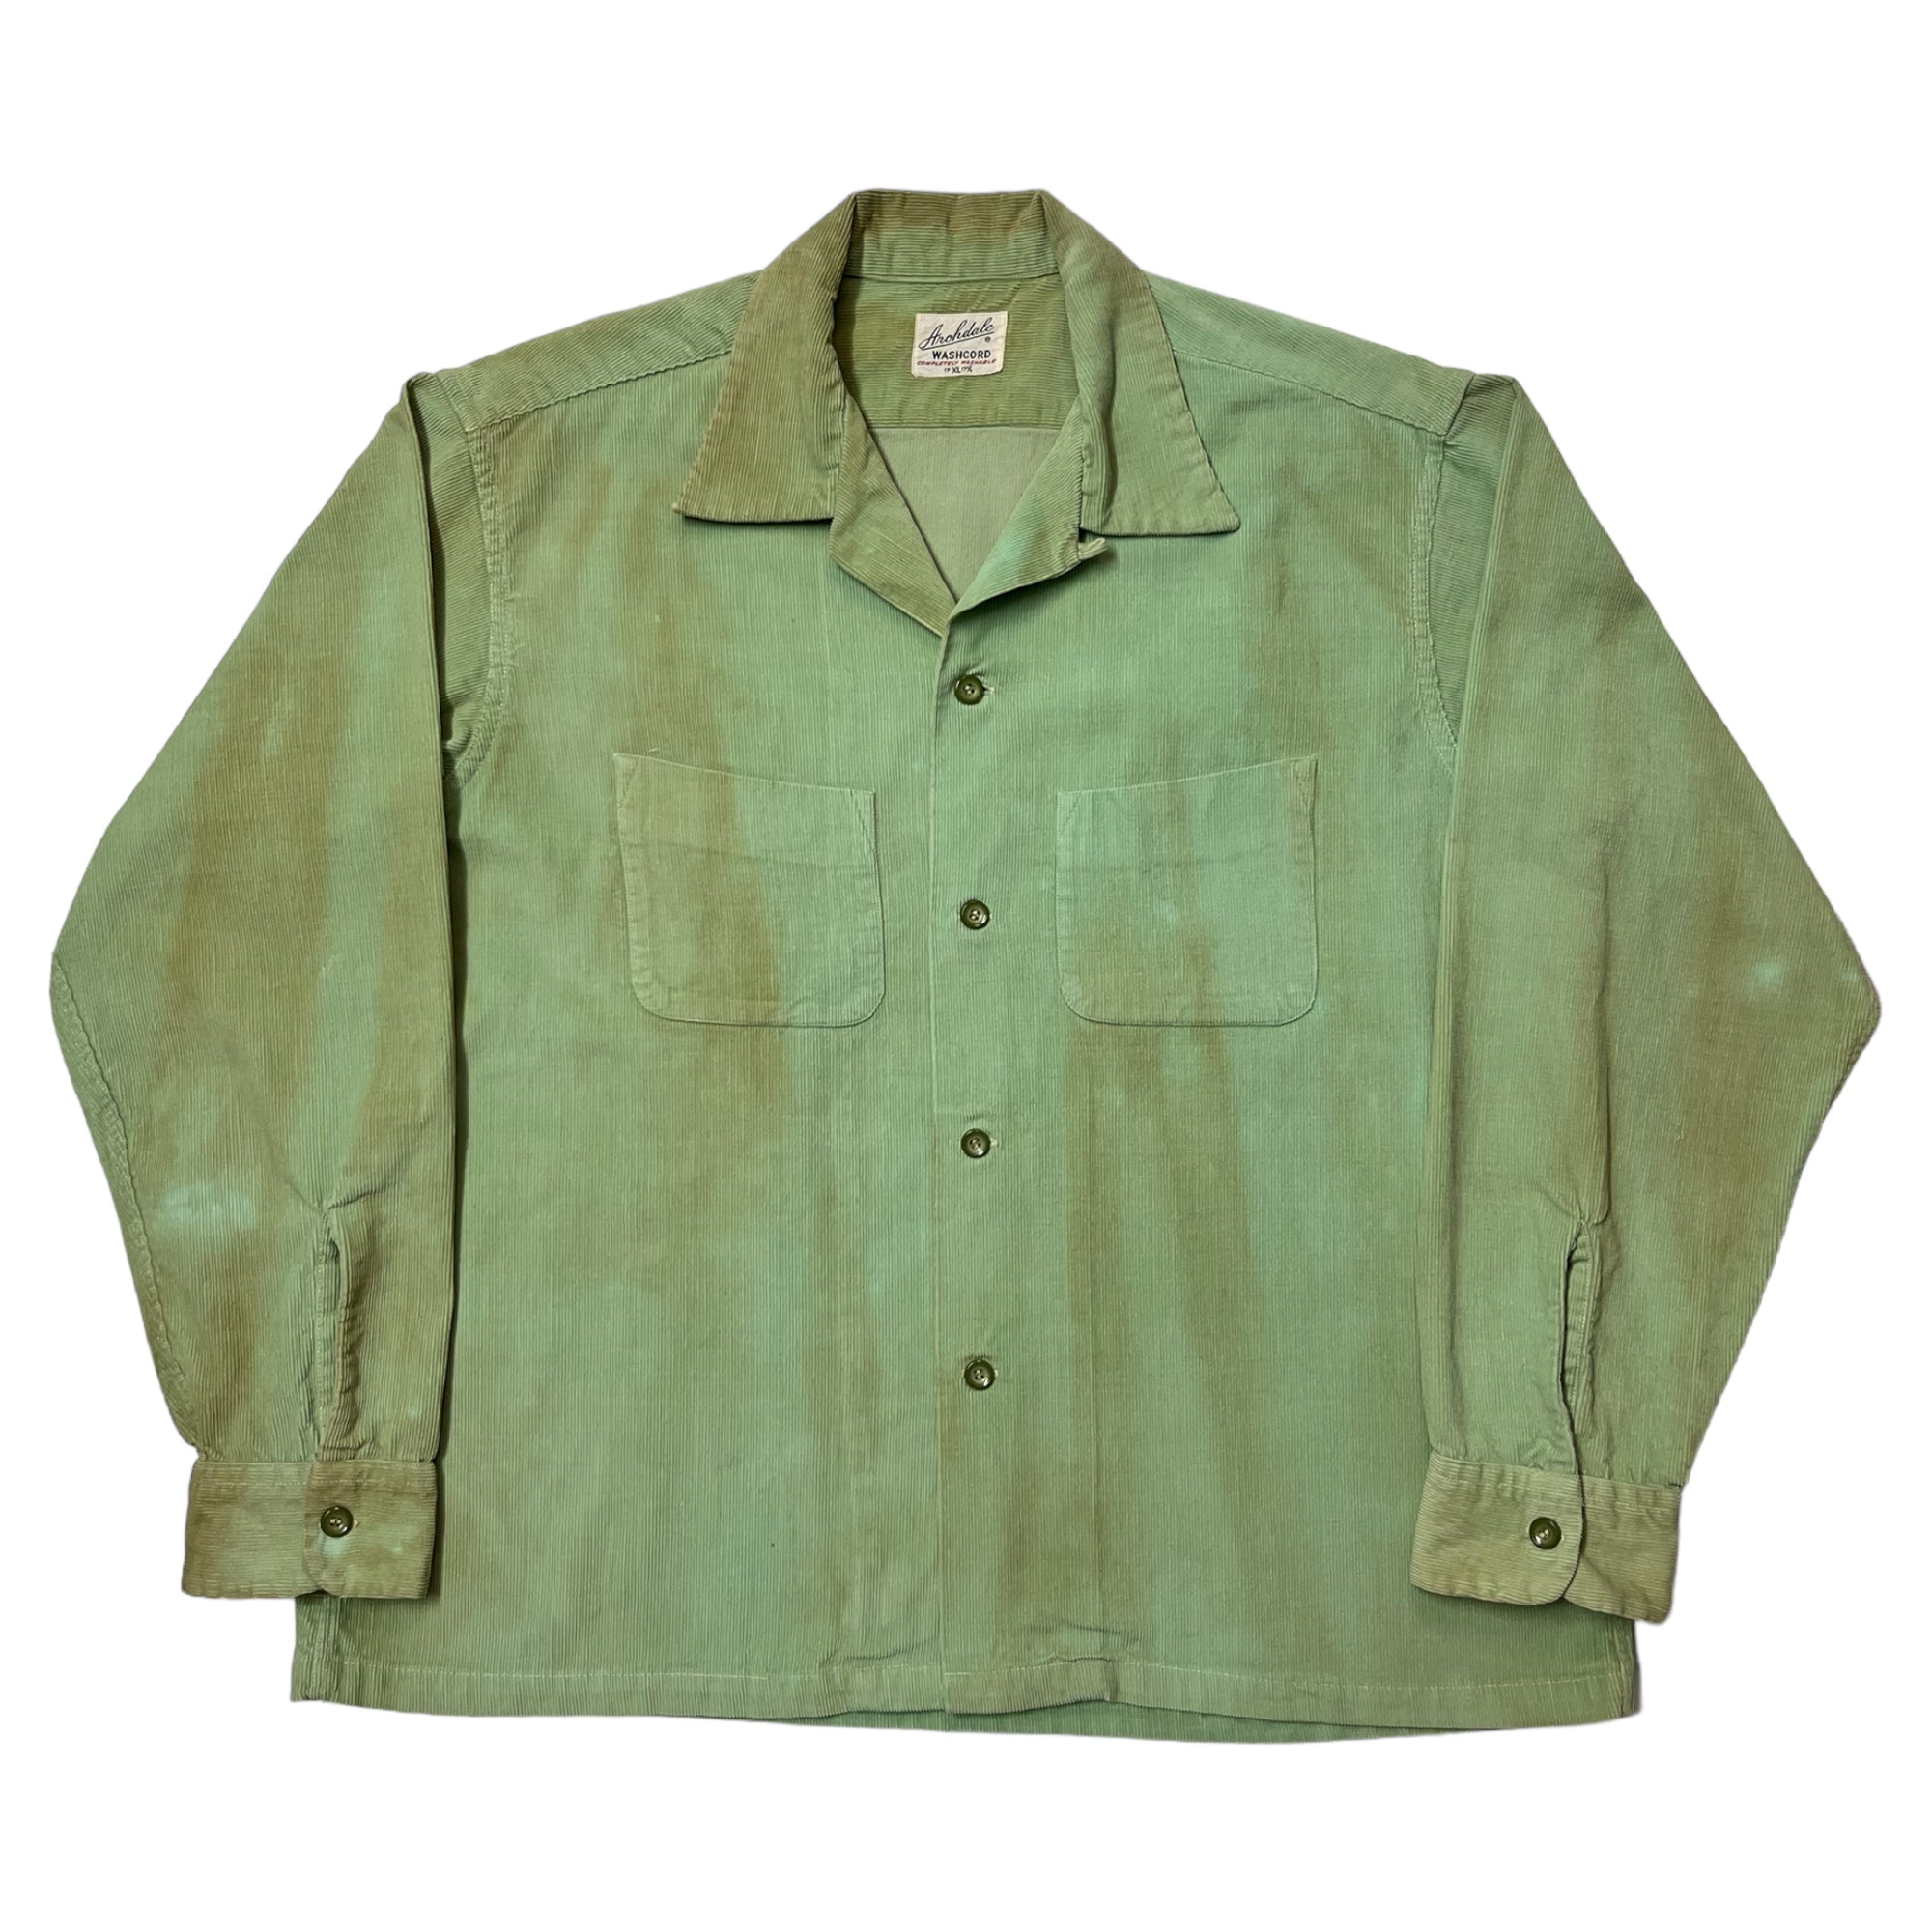 1950s Loop Collar Corduroy Distressed/Stained Shirt - Sea Foam Green - L/XL